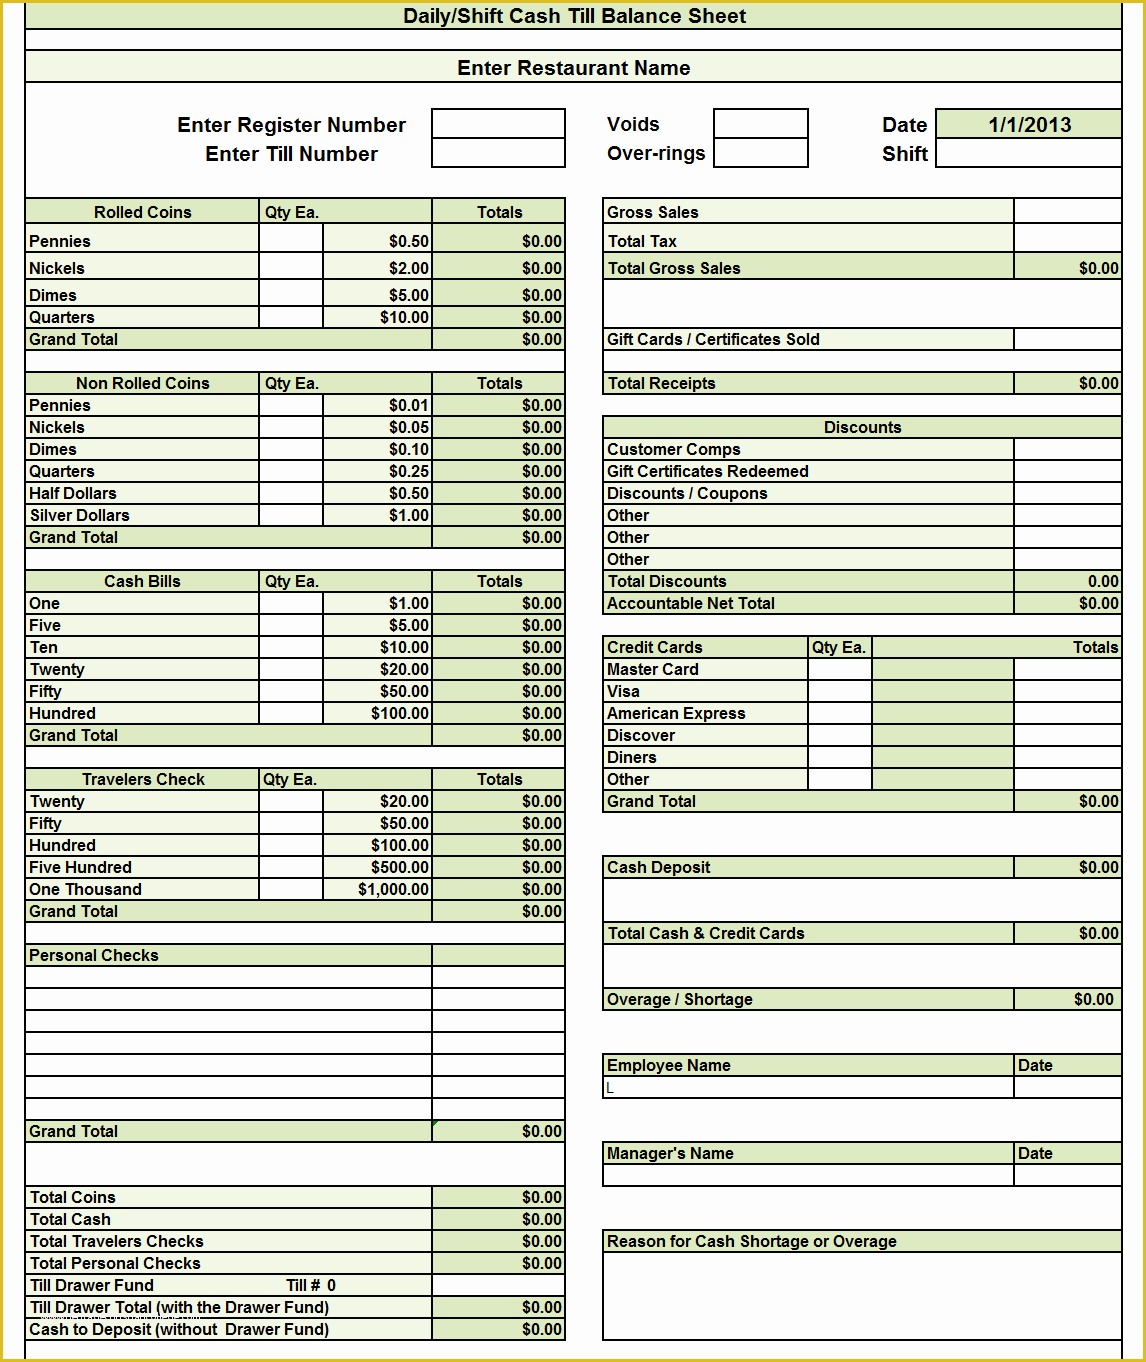 Free Cash Drawer Balance Sheet Template Of Search Results for “cash Register Balance Sheets